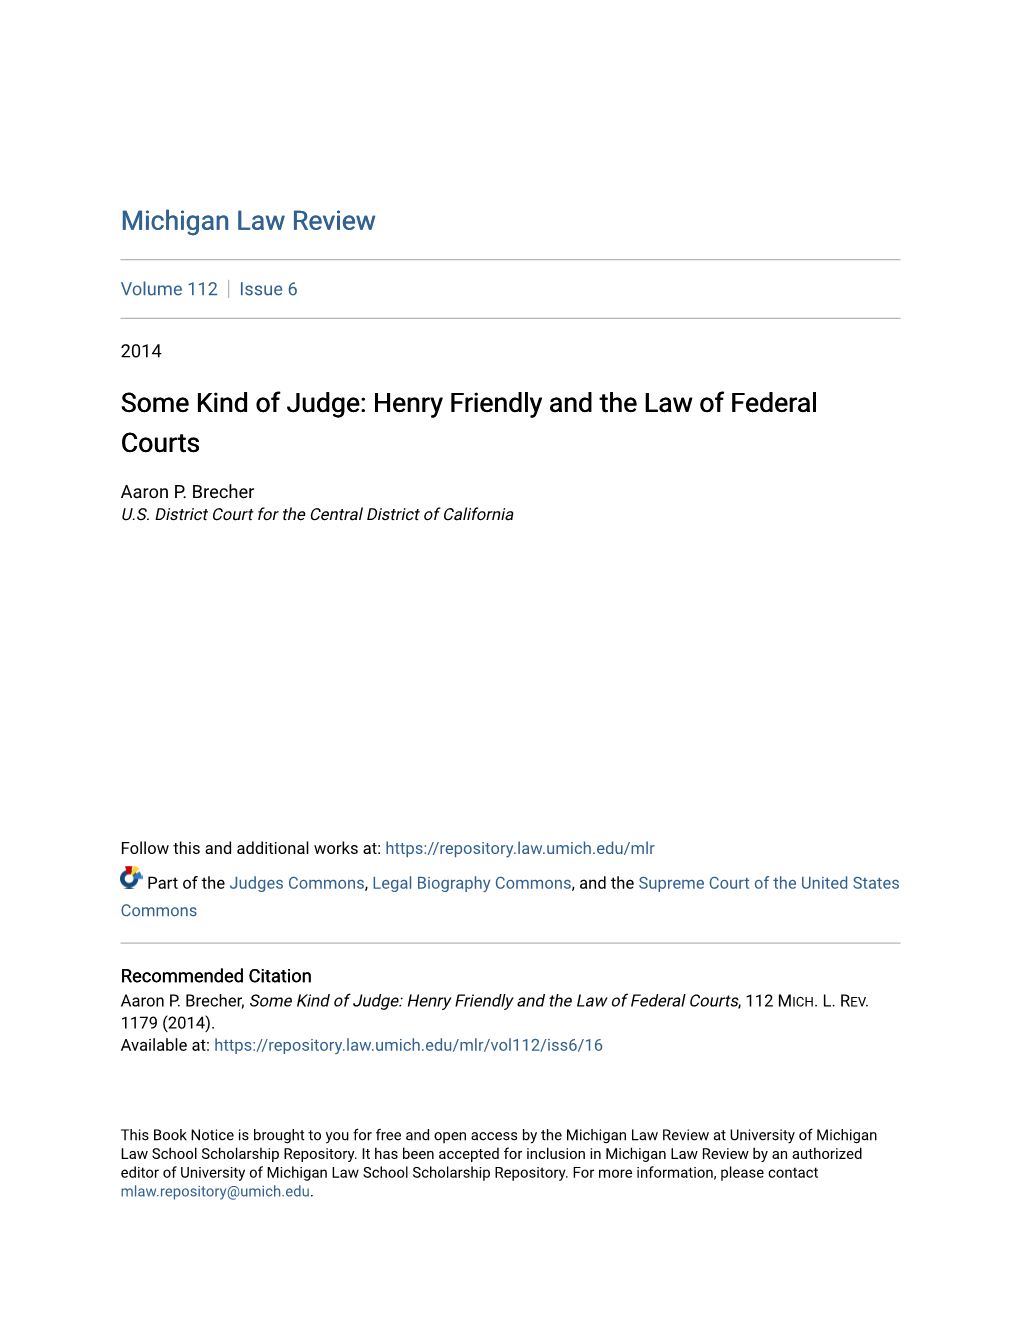 Henry Friendly and the Law of Federal Courts